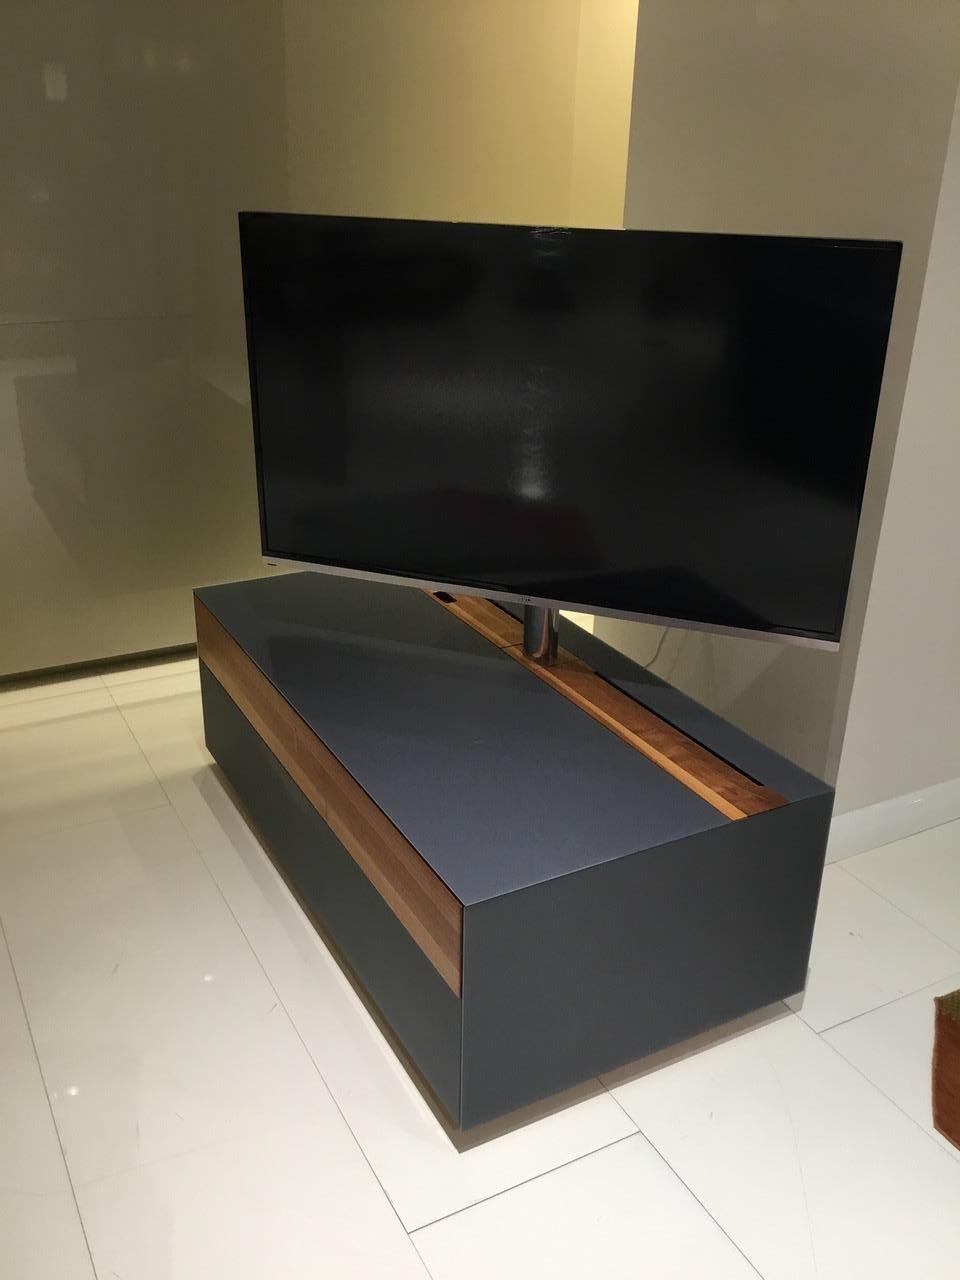 Entertainment center made of walnut and beech wood with matt anthracite glass top and sides. The finished back allows you to place against a wall or floated in the middle of the room as a room divider. 

Shown with a 51